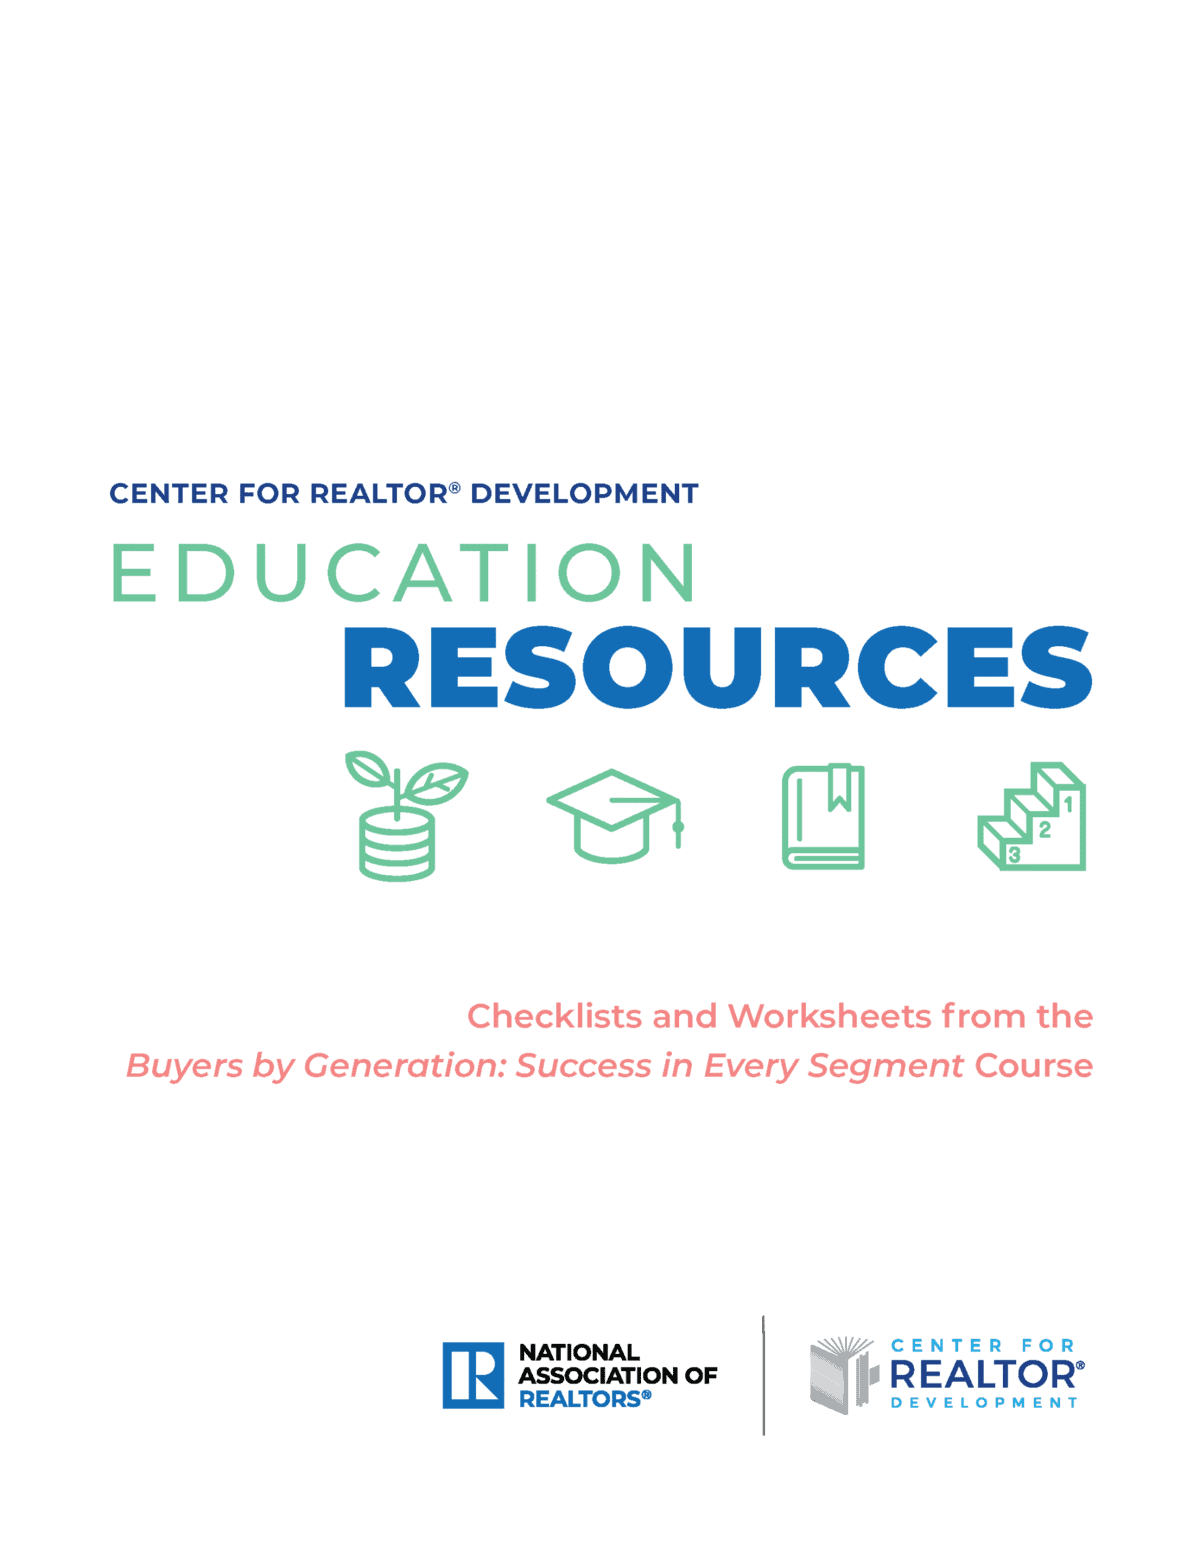 Education Resources infographic